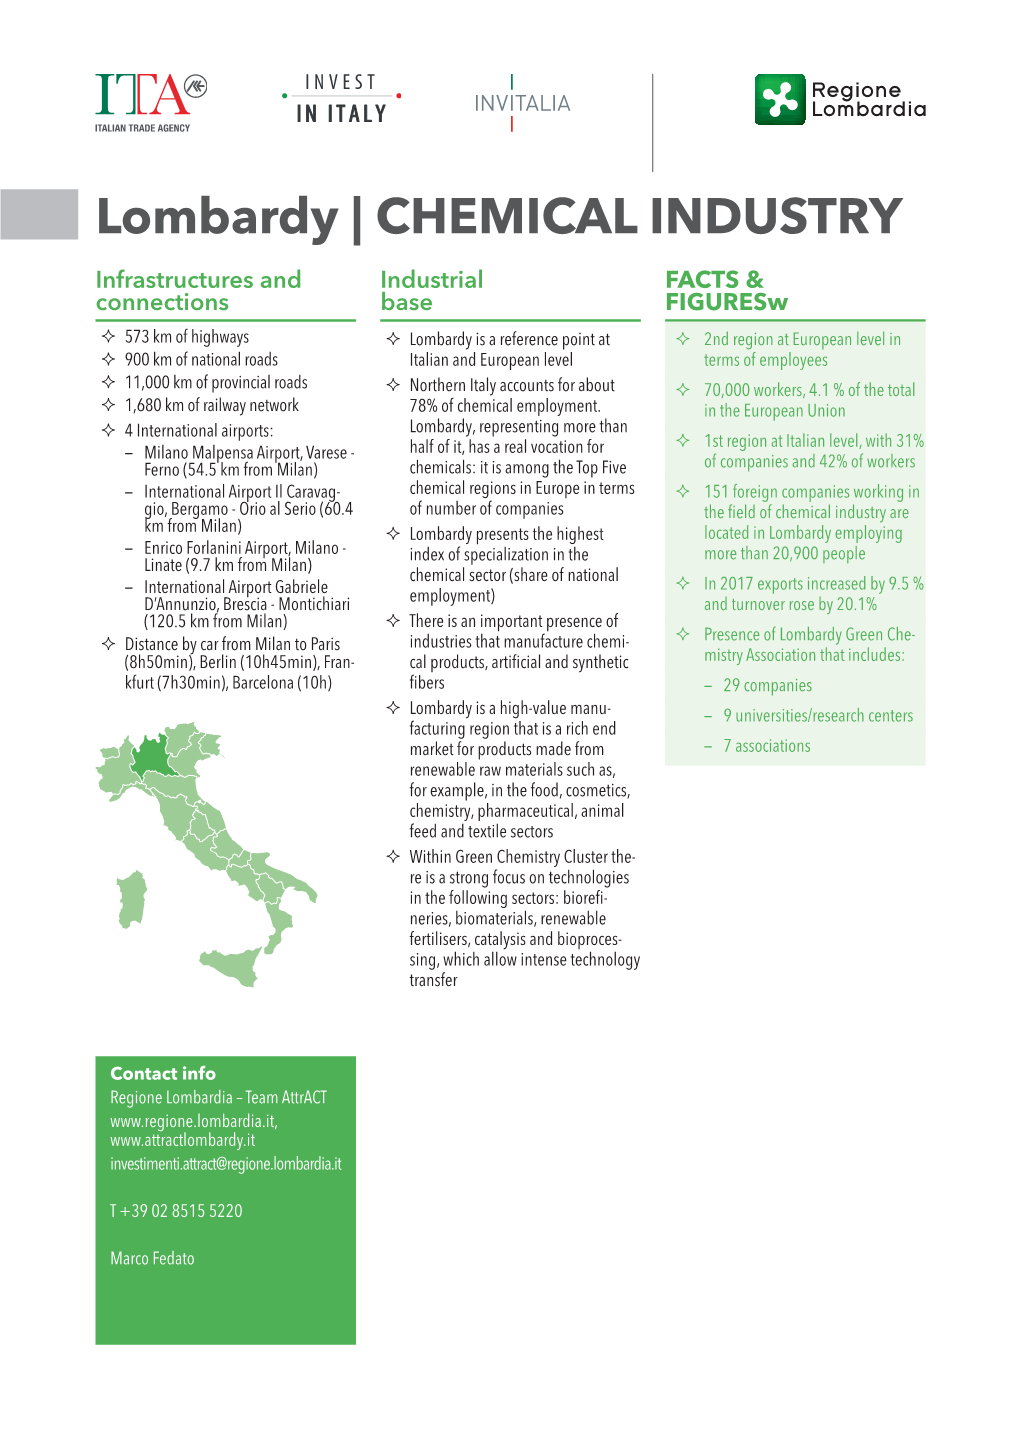 Lombardy | CHEMICAL INDUSTRY